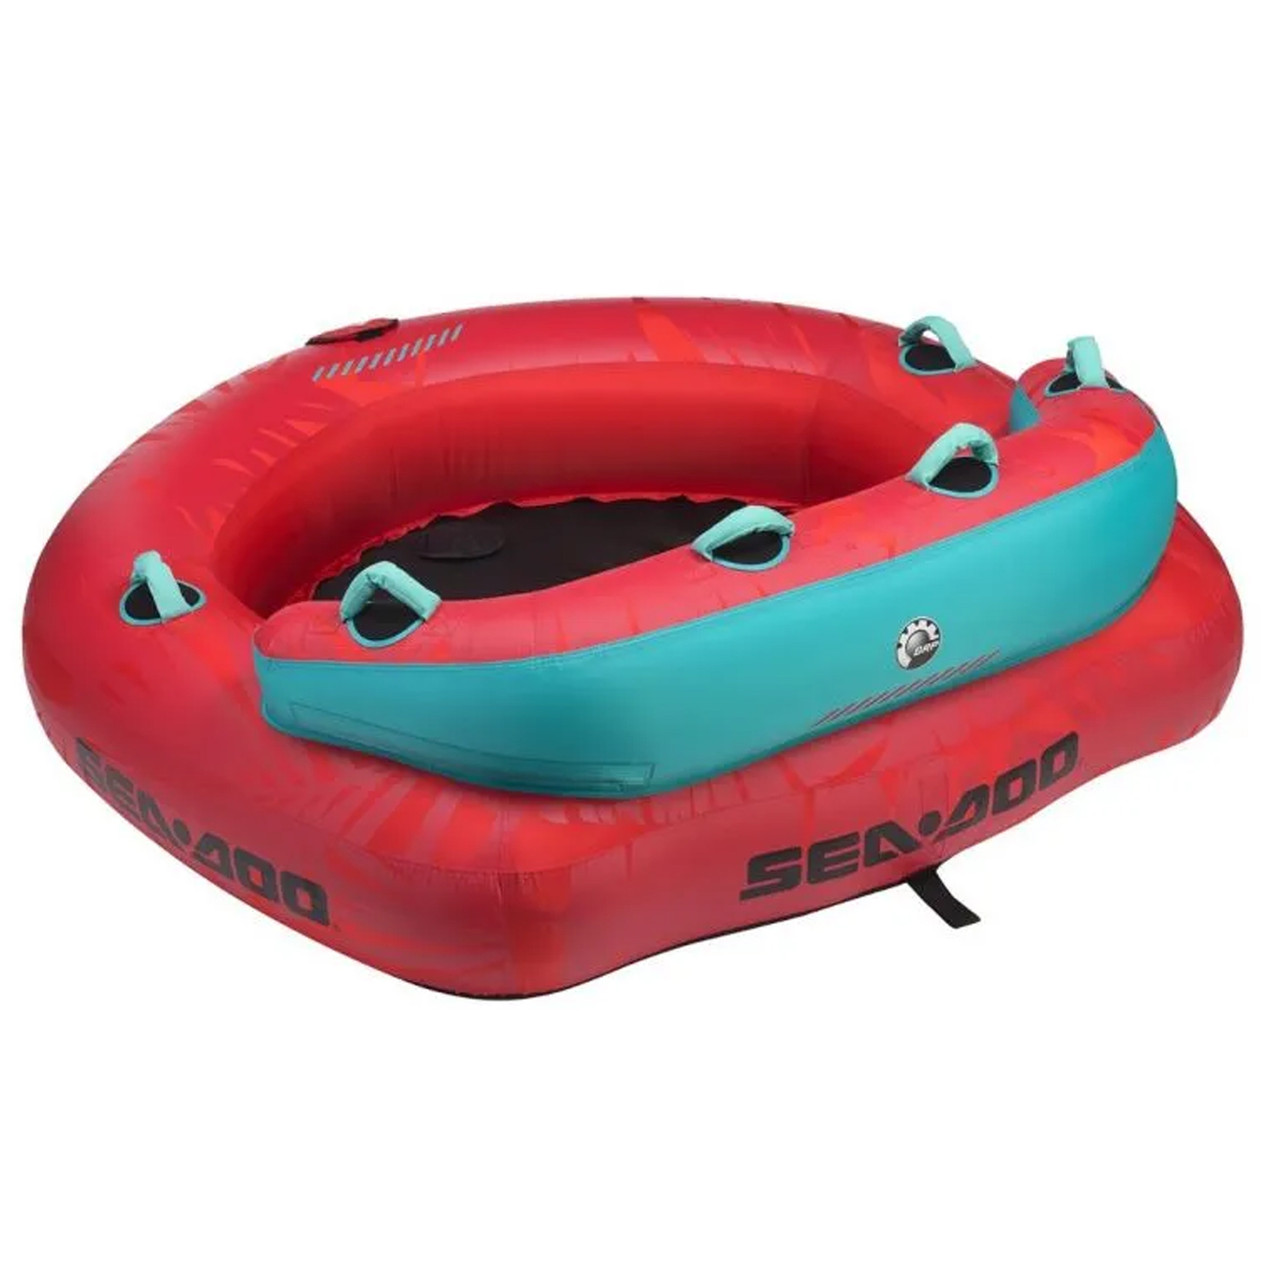 Sea-Doo New OEM, 68" x 67" Heavy-Duty Two-Person Two-Way Sit-In Tube, B107090000